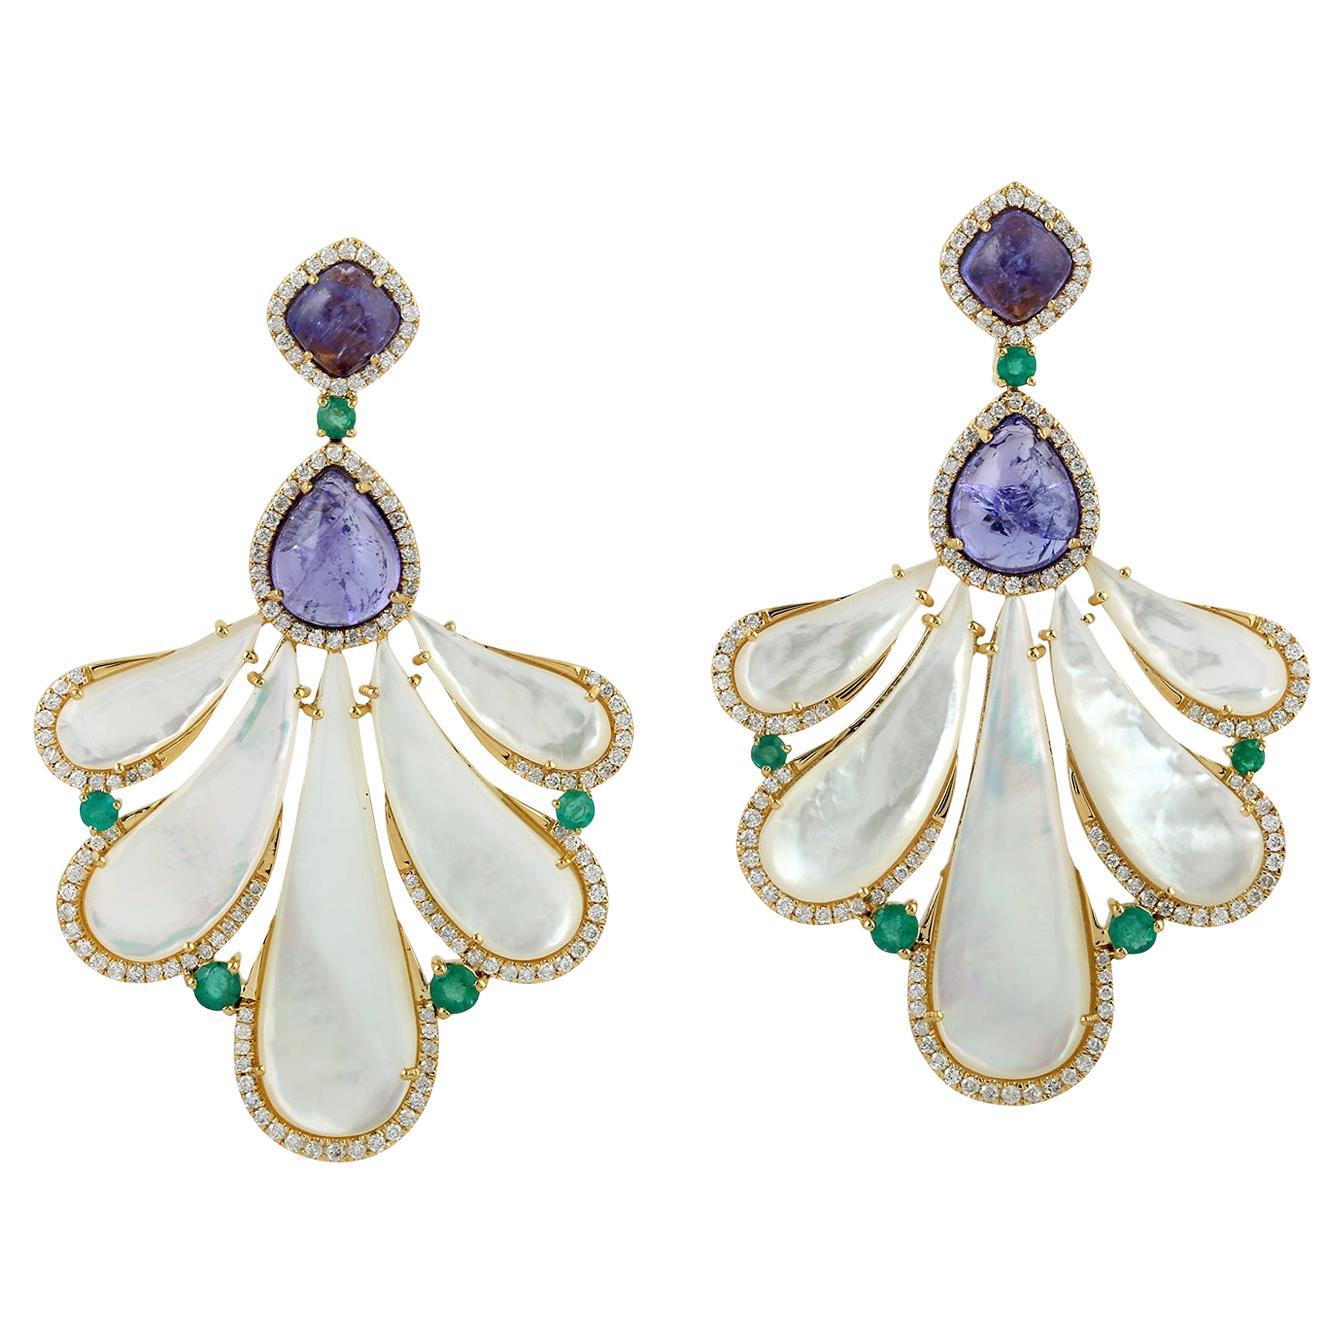 32.17ct Pearl Dangle Earrings With Tanzanite & Emerald Accented With Diamonds